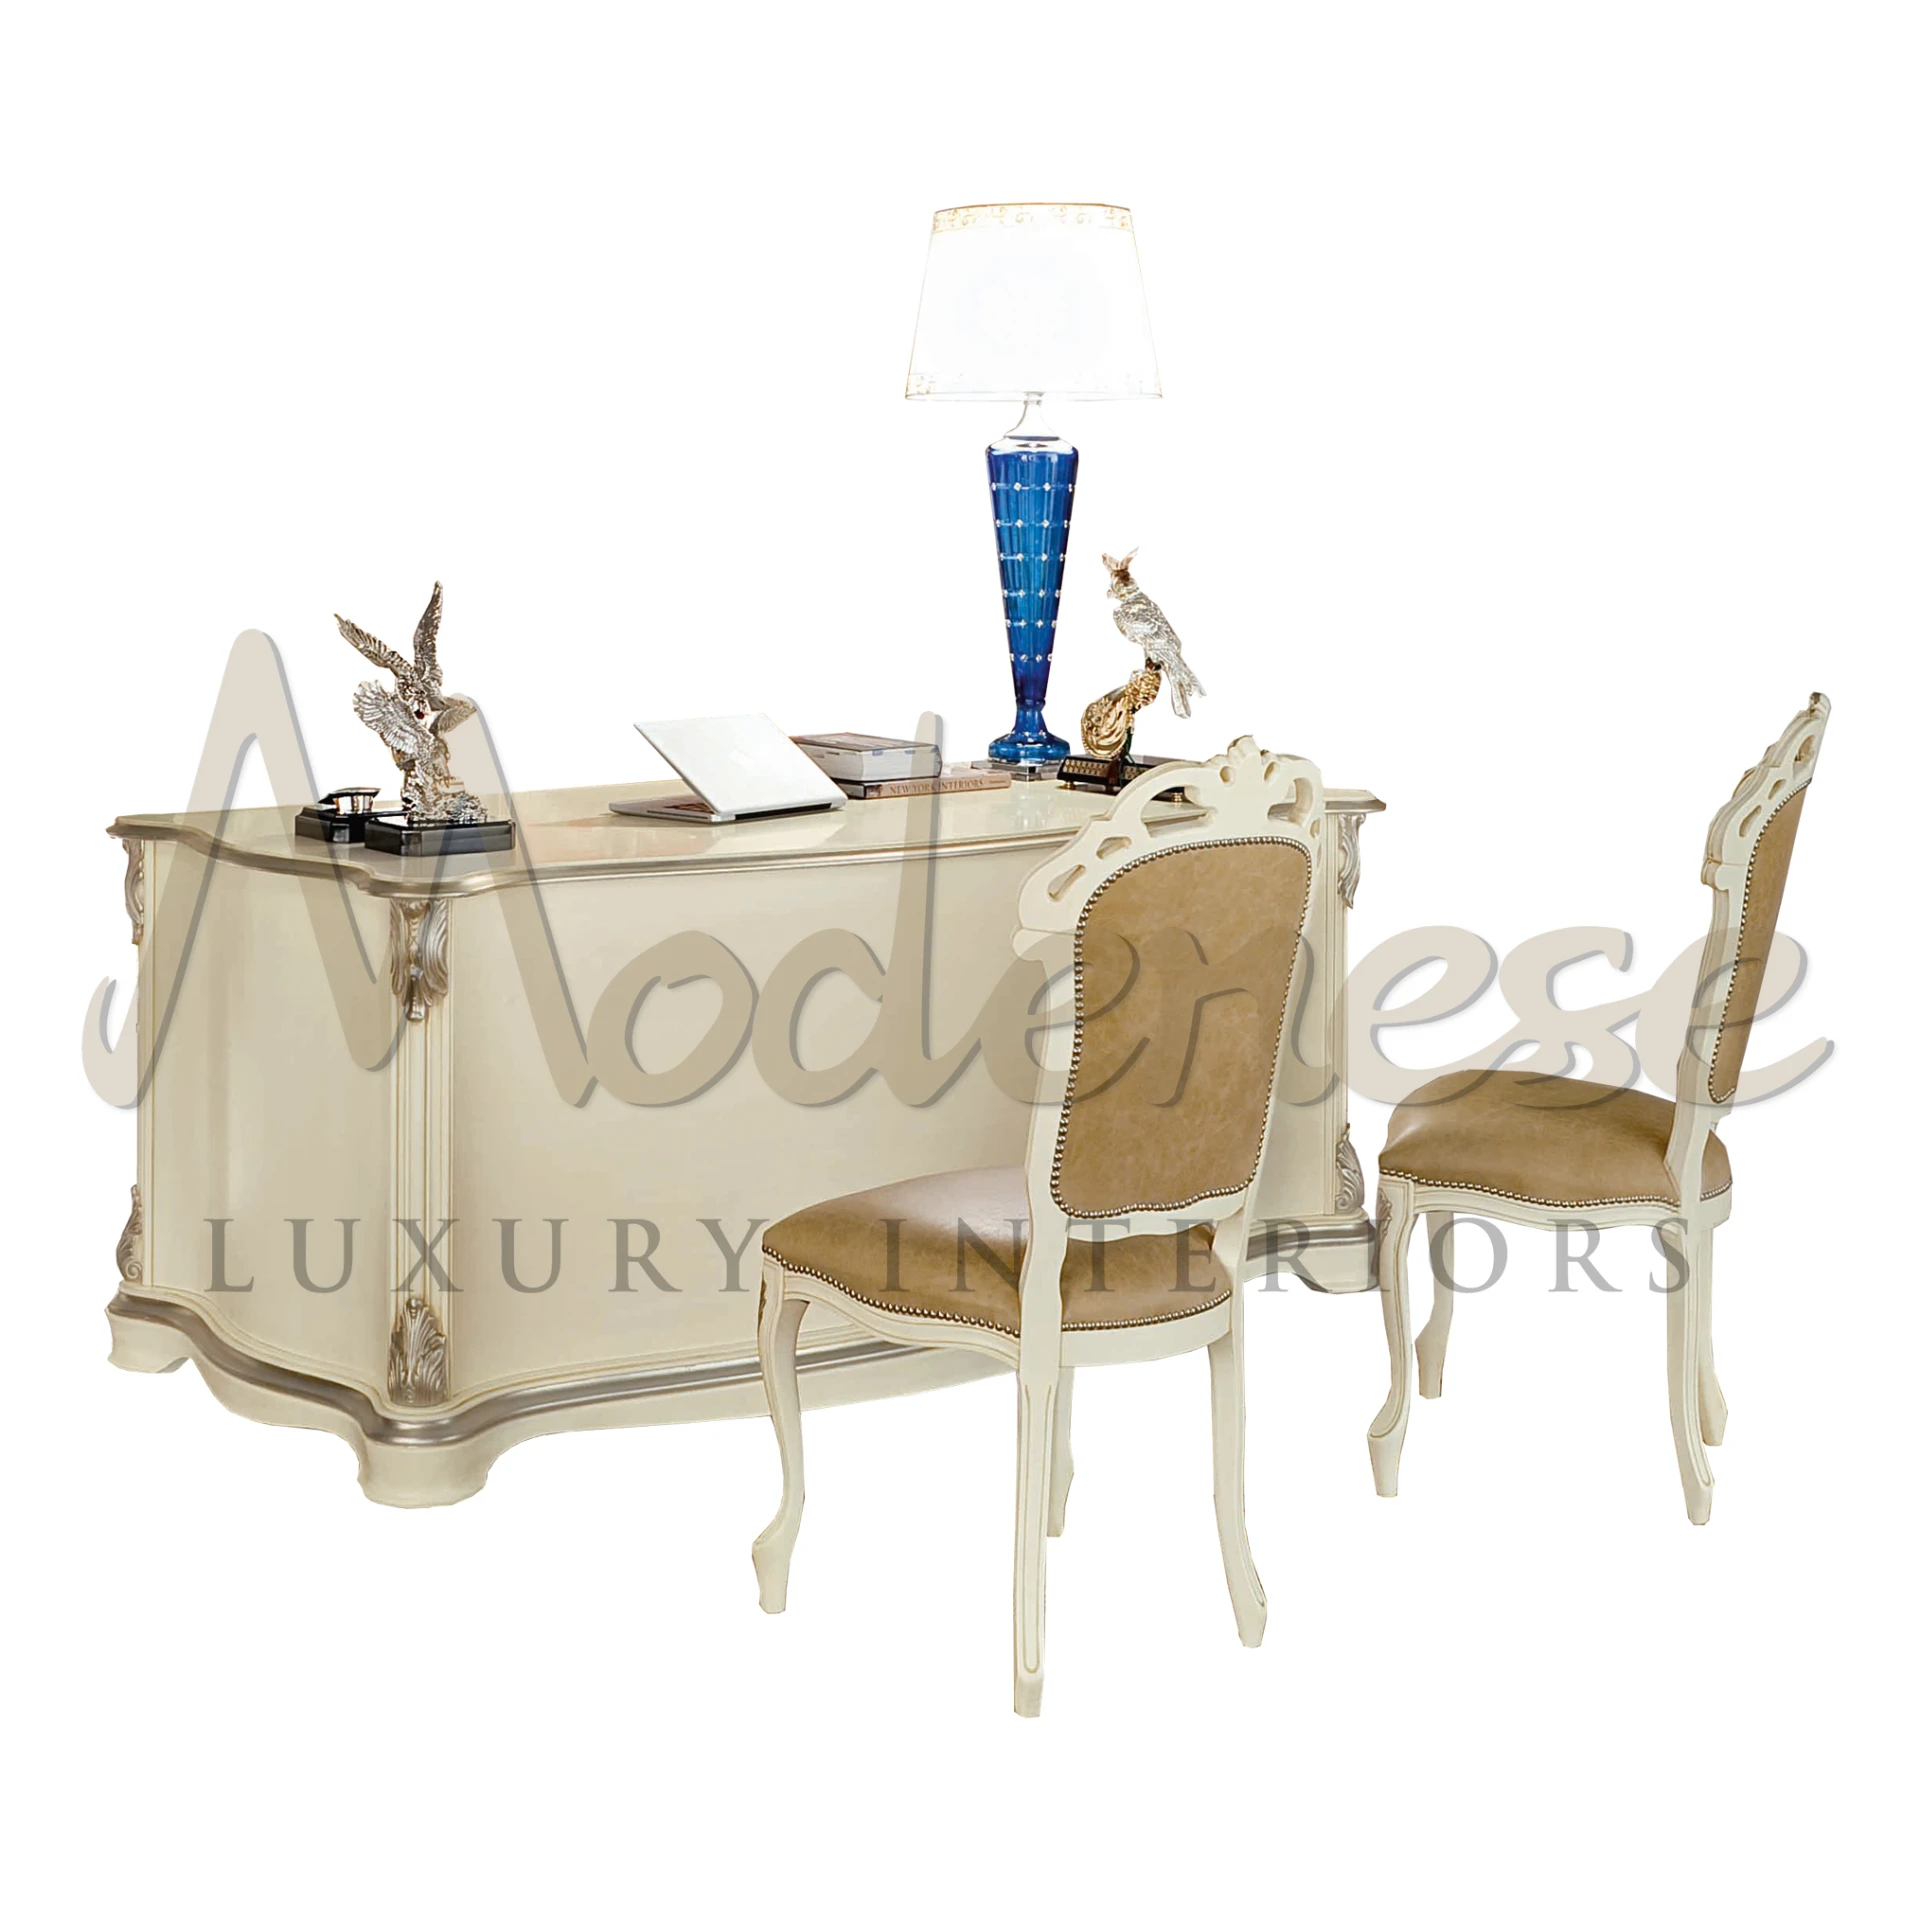 Product View with Clear Background - Office Writing Desk - Desk - Modenese Luxury Furniture